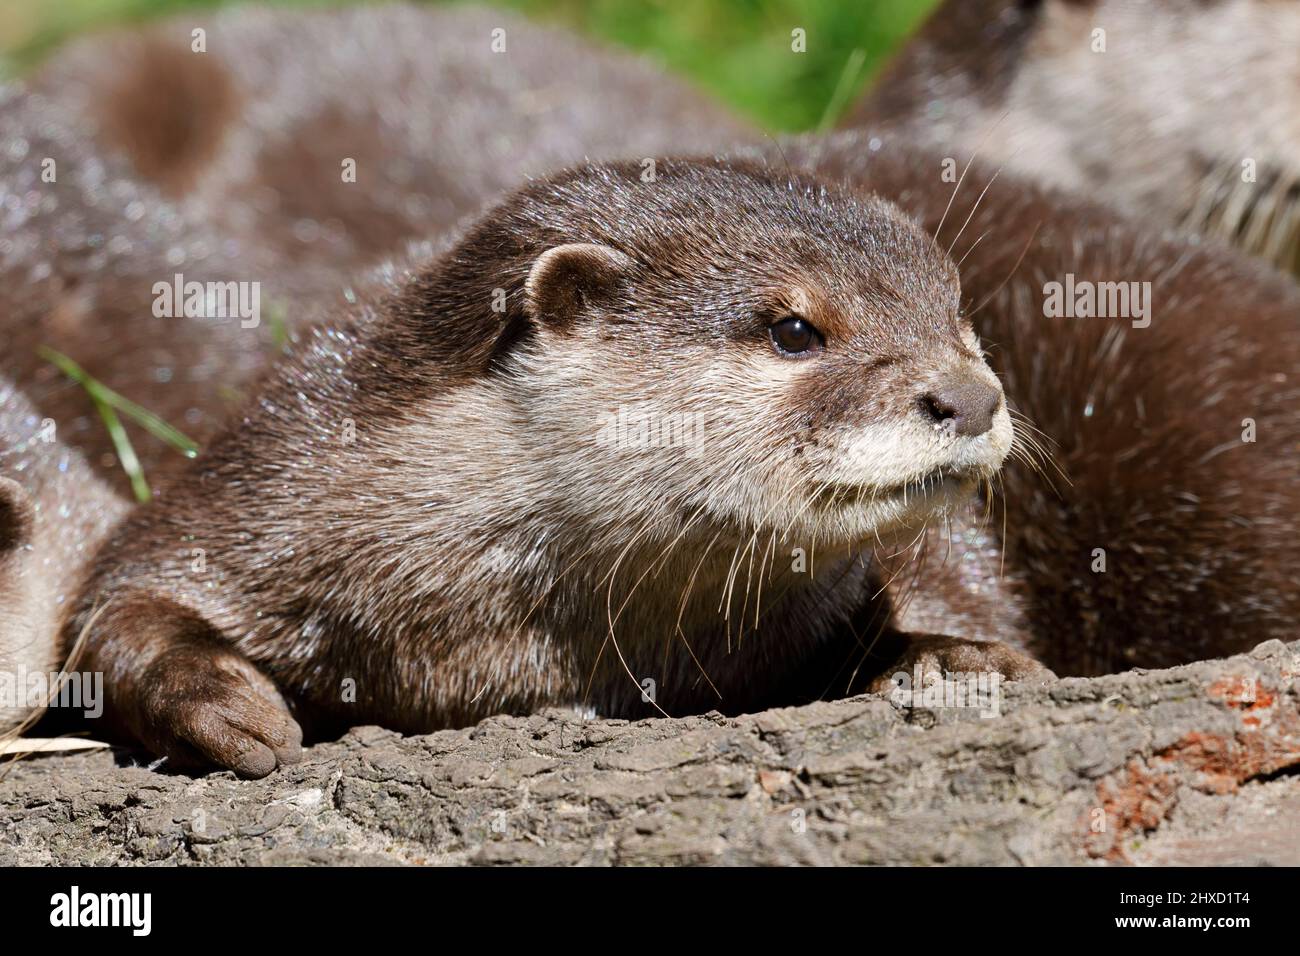 Dwarf or short-clawed otter (Aonyx cinerea), adult, Asia Stock Photo